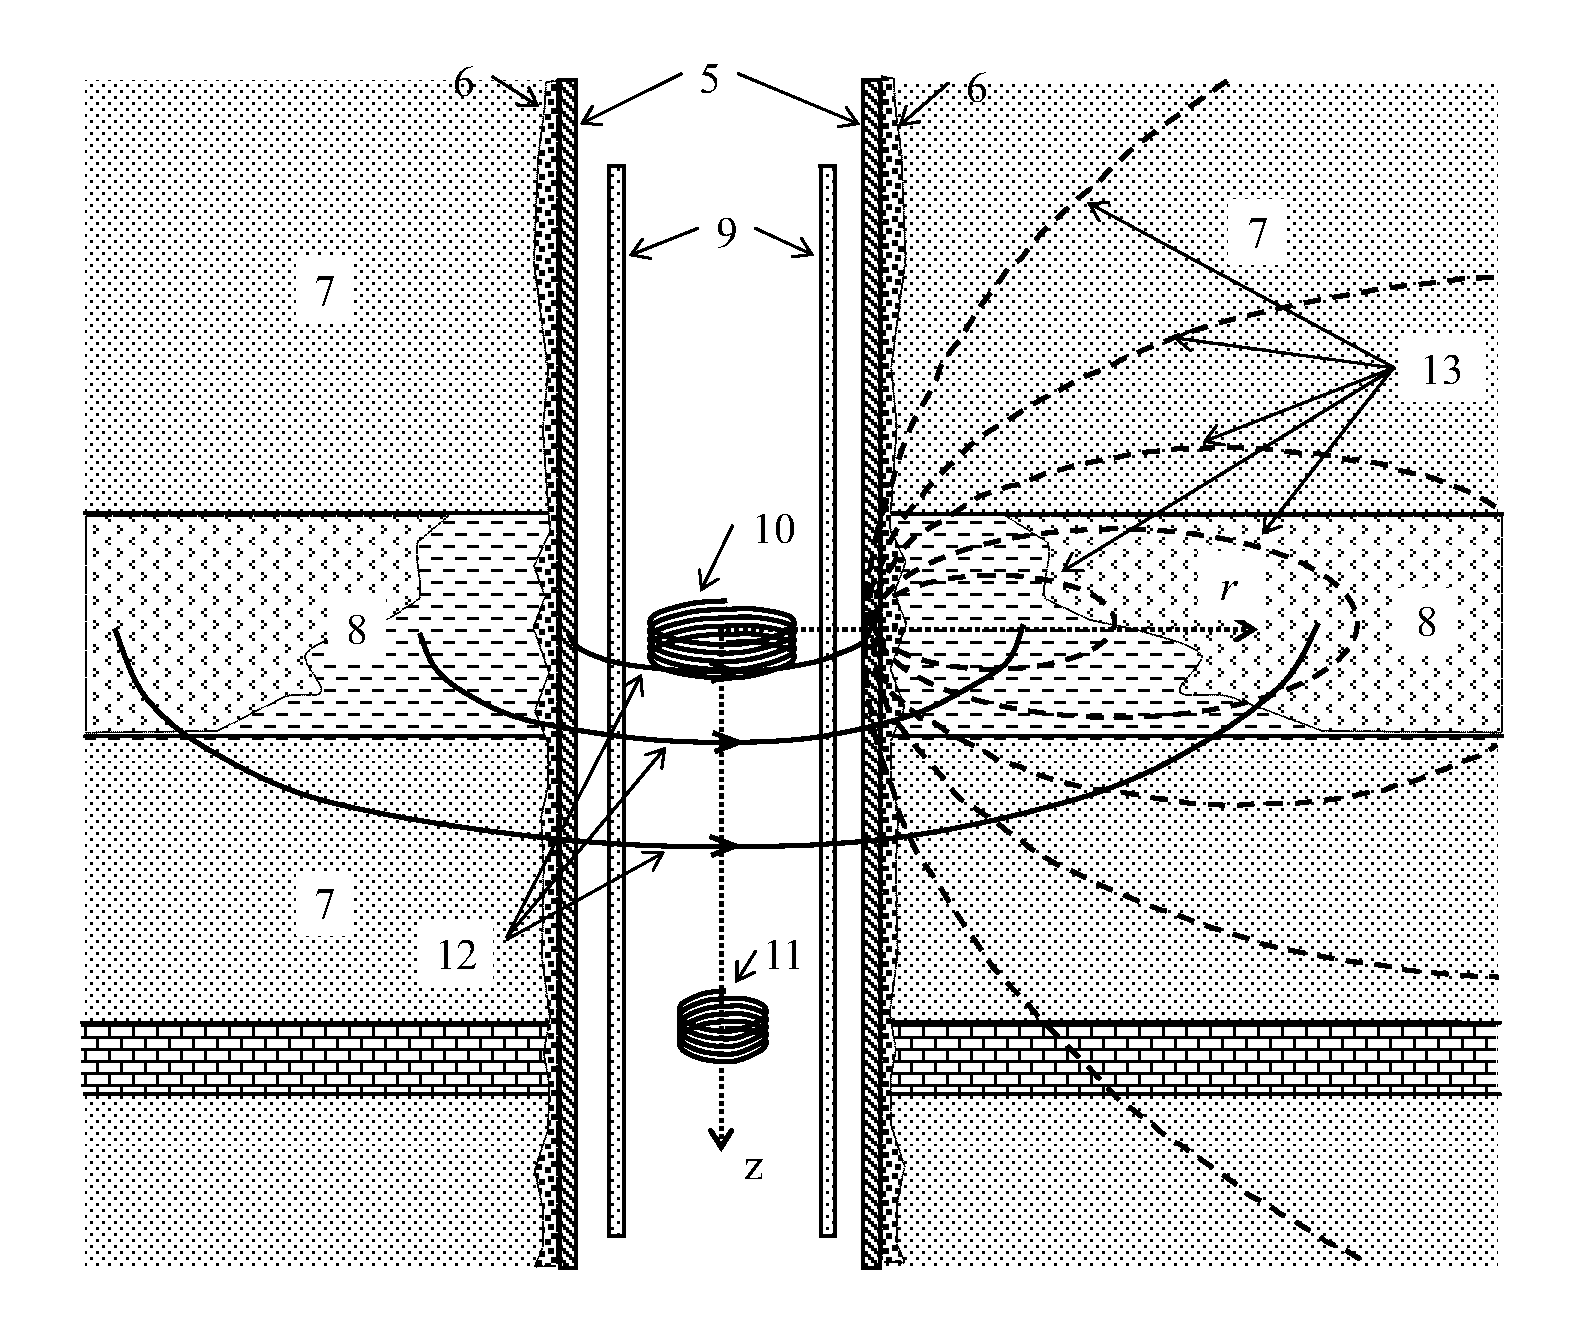 Method for detecting formation resistivity outside of metal casing using time-domain electromagnetic pulse in well